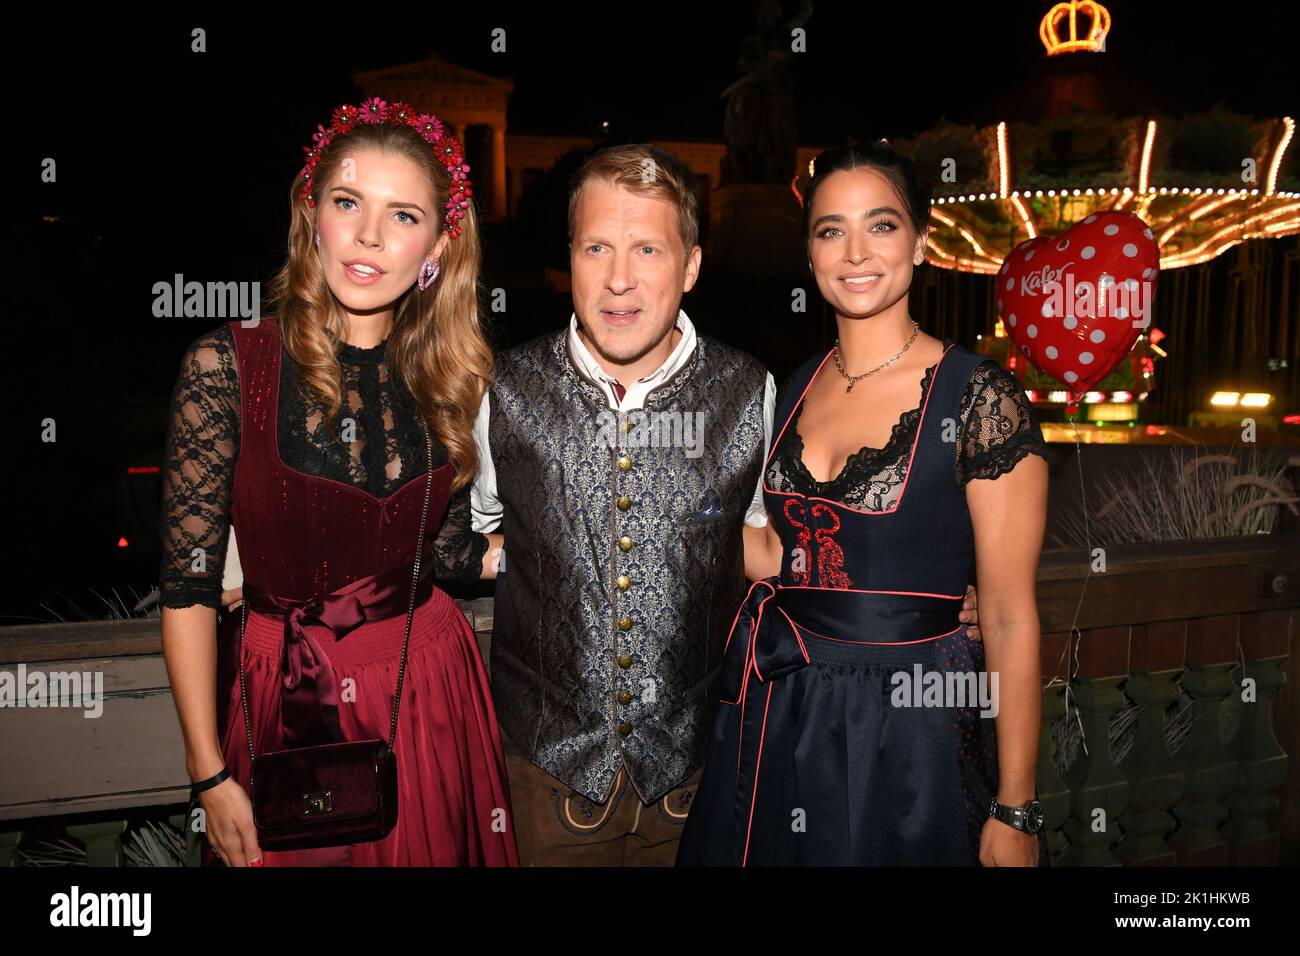 Munich, Germany. 18th Sep, 2022. Singer Victoria Swarovski, (l-r), comedian  Oliver Pocher and his wife Amira celebrate at the "Almauftrieb" in front of  the Käfer tent at the Oktoberfest. The "Almauftrieb" is